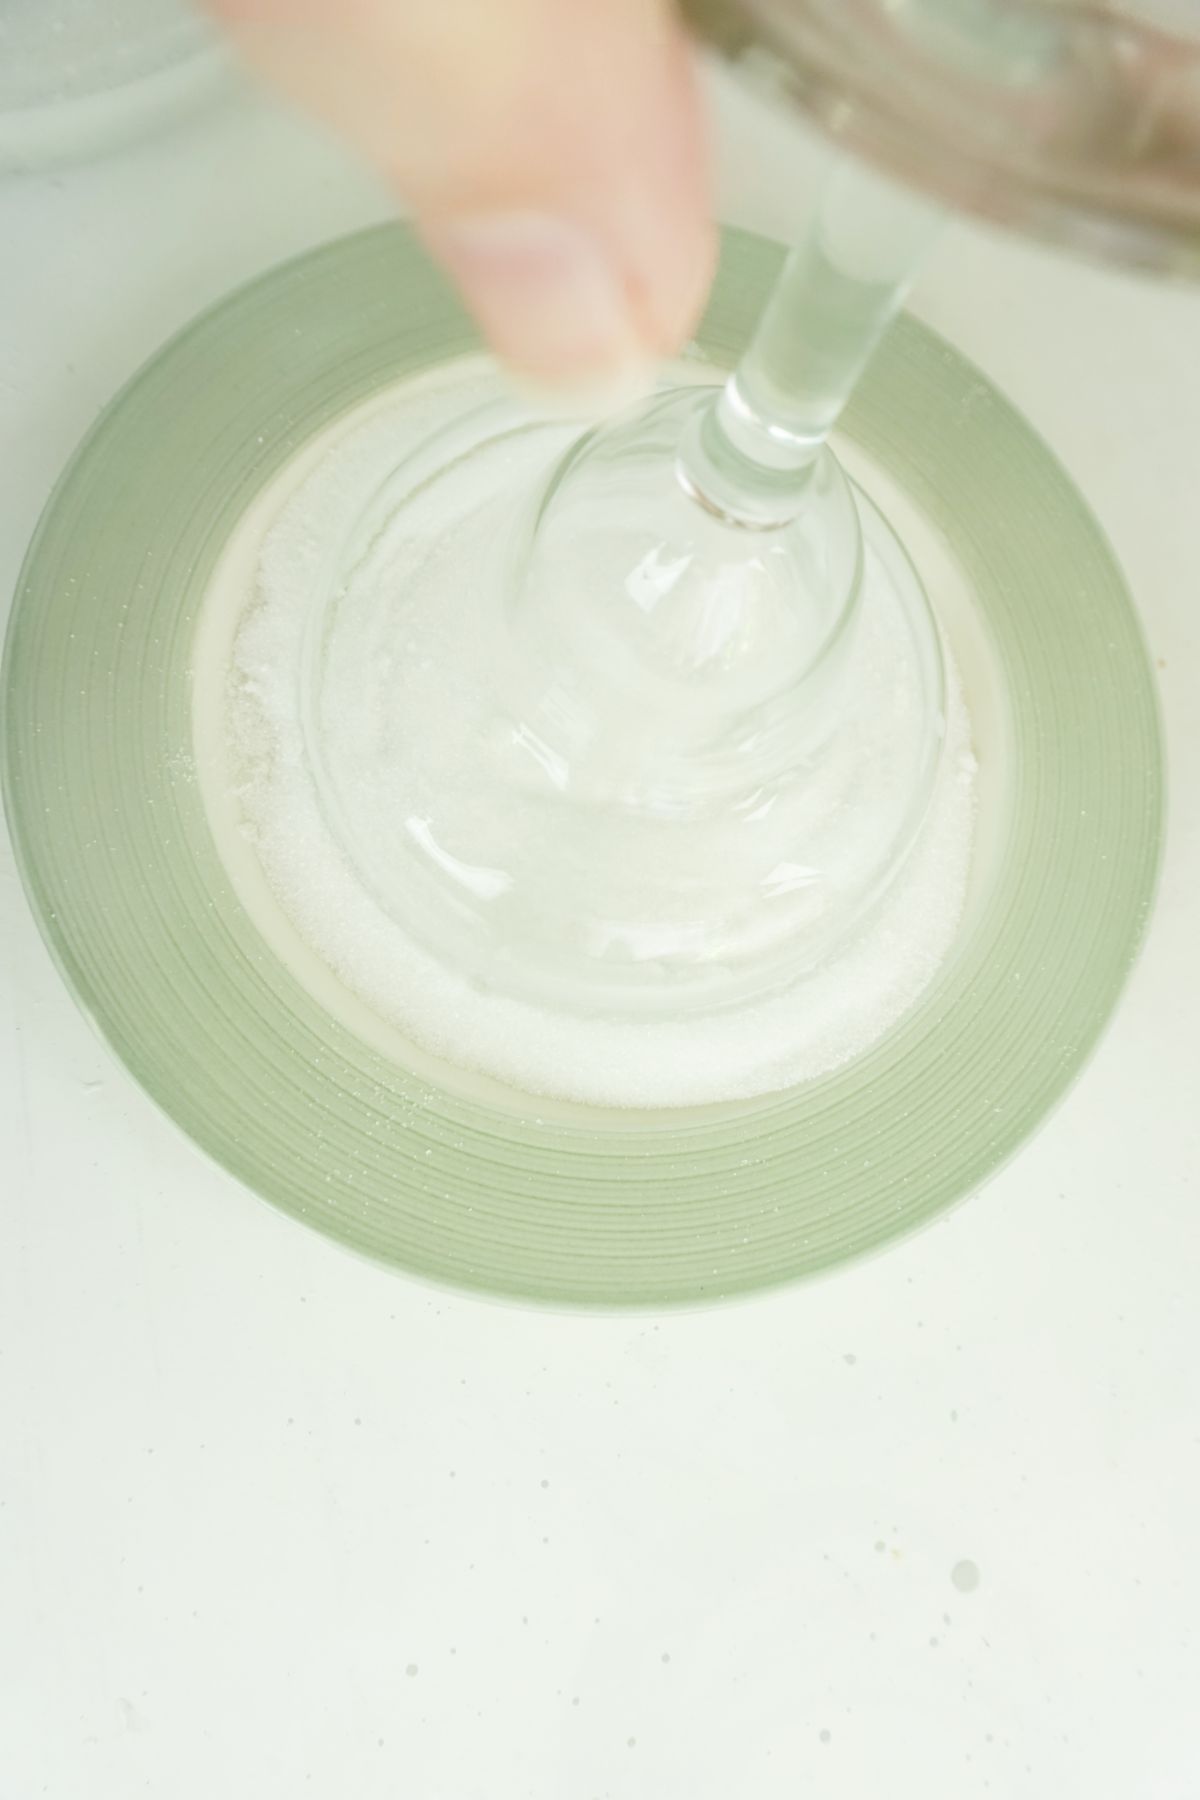 a hand dipping an upside down glass on a plate with sugar.